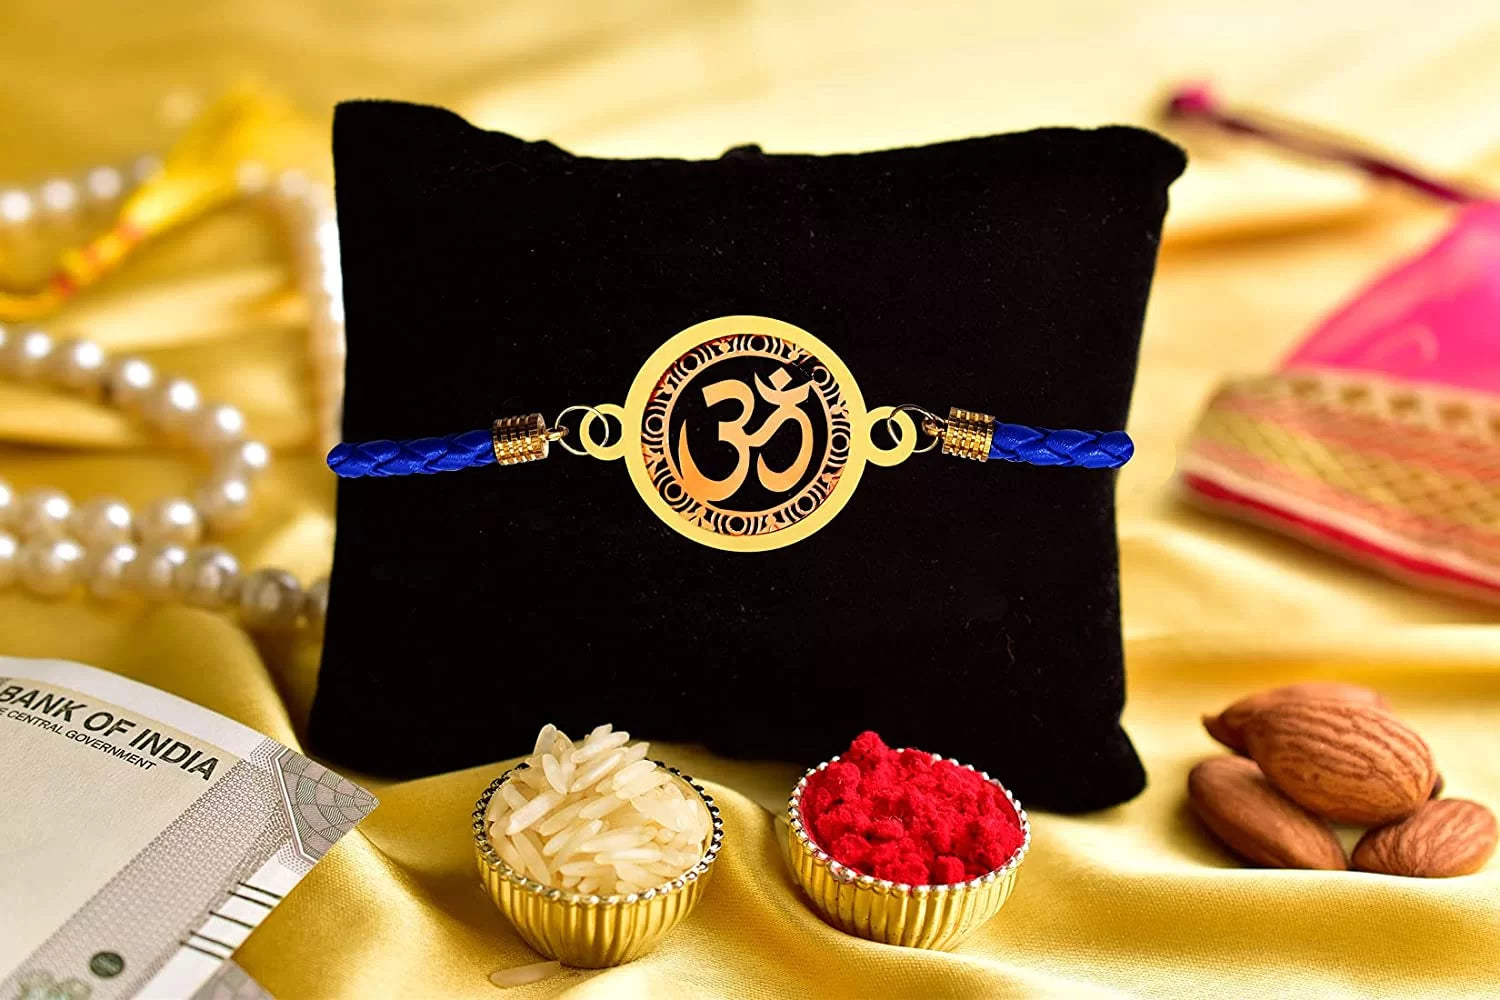 Personalized Photo Frame and Gold Plated Rakhi